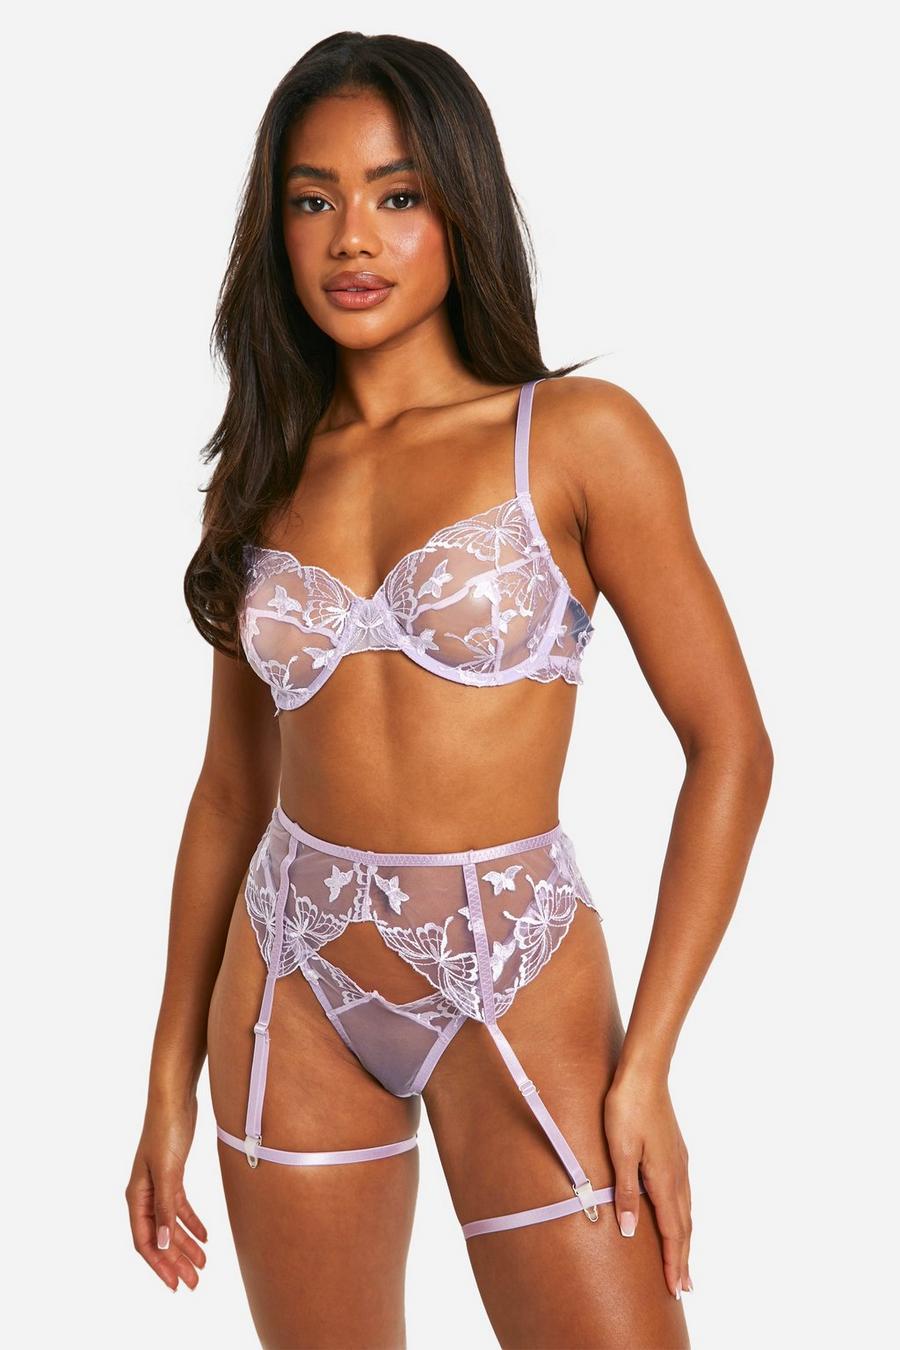 Lilac Butterfly Mesh Bra, Thong And Suspender Set 